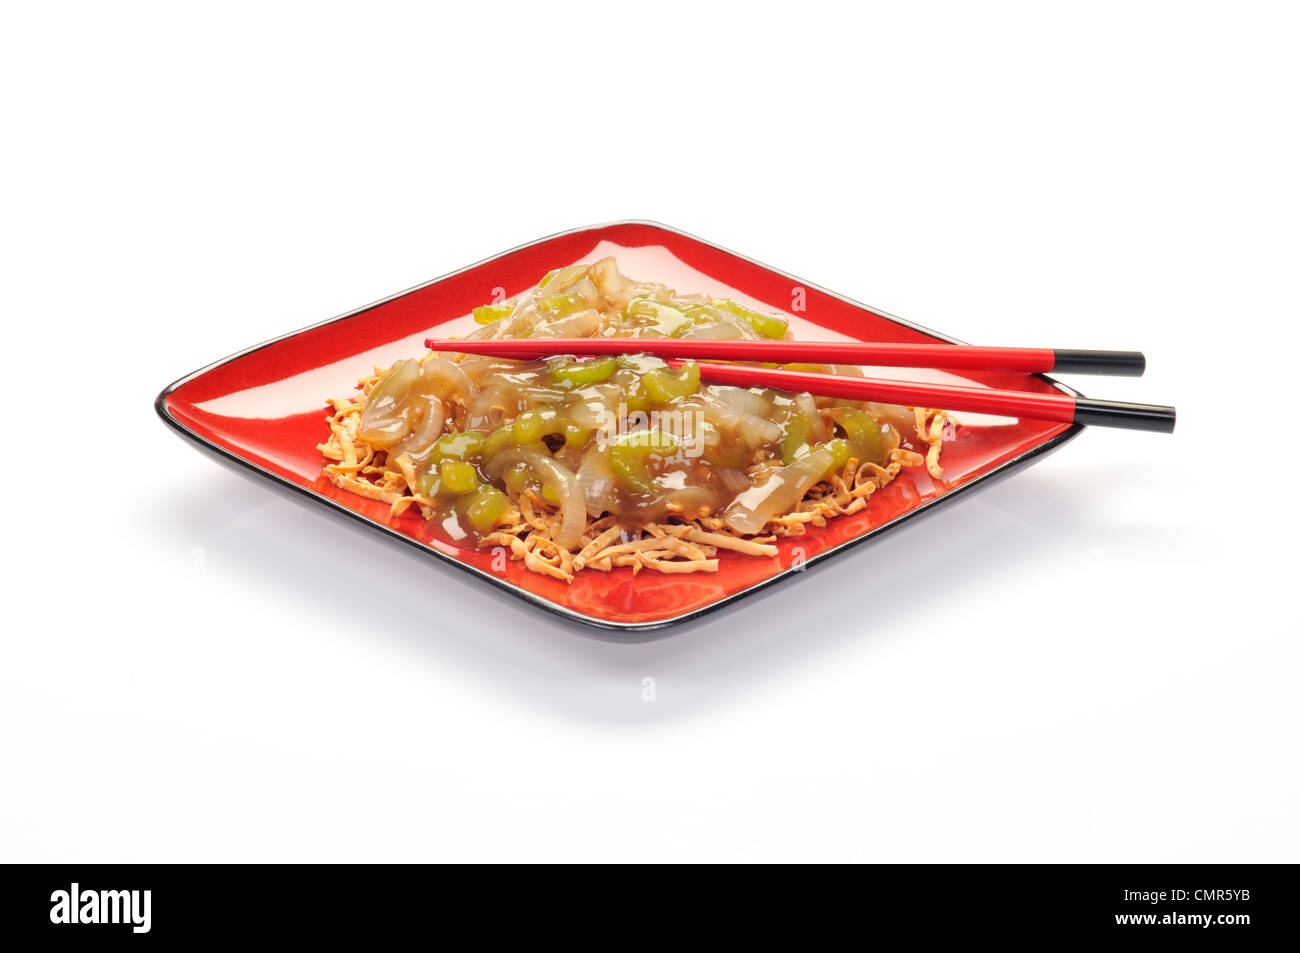 Plate of Chinese vegetable chow mein on red plate with chopsticks Stock Photo